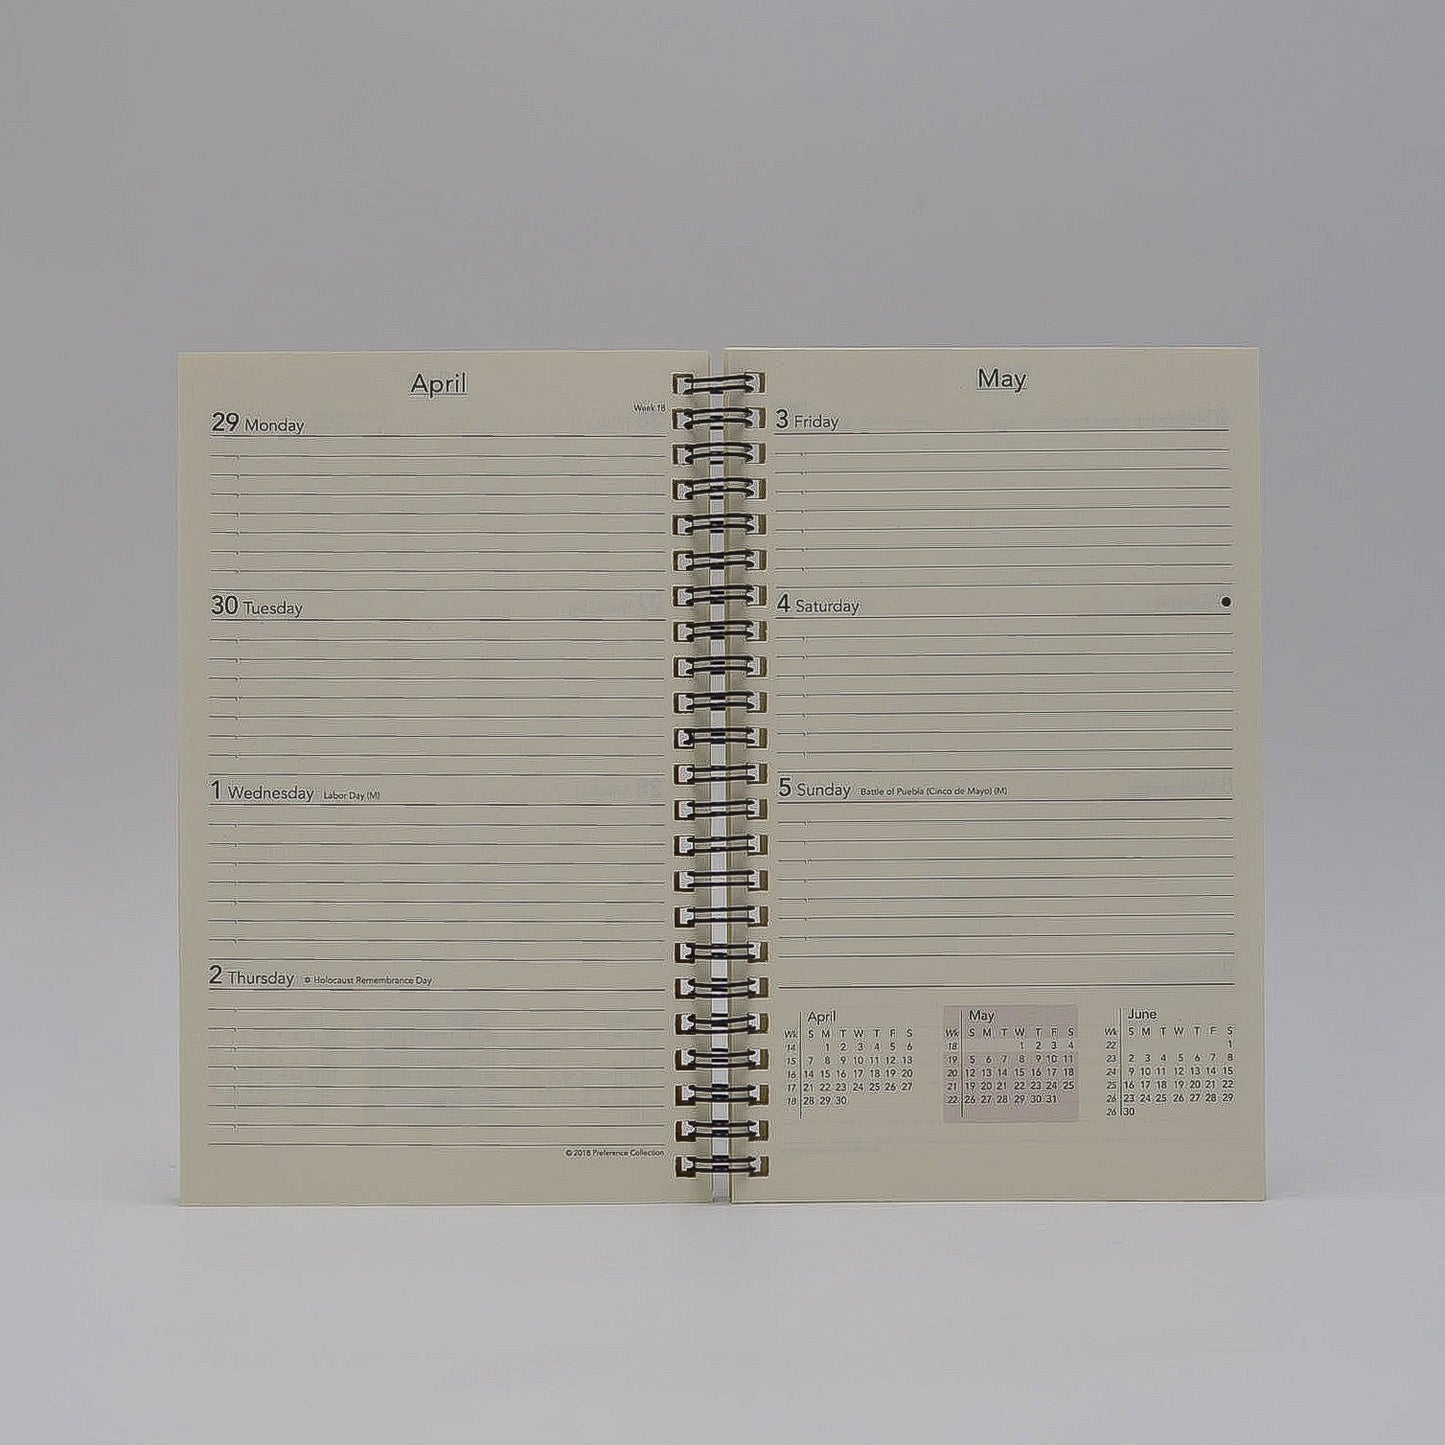 Preference Collection: PD85WI 8 x 5 Wirebound Planner monthly weekly calendar for 2019 or 2020 ivory wired 